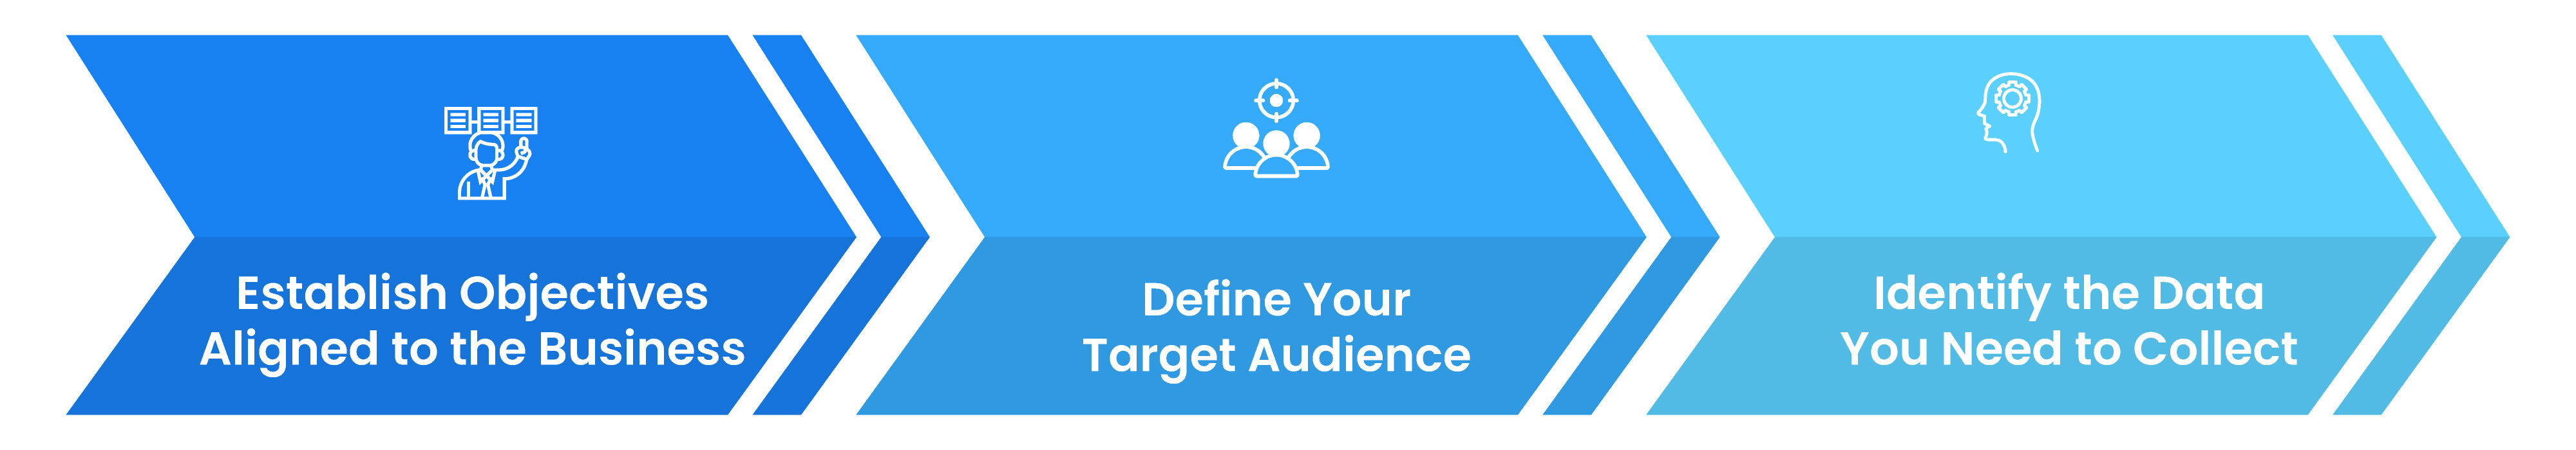 Establish Objectives, Define Target Audience and Identify the Data For Collection